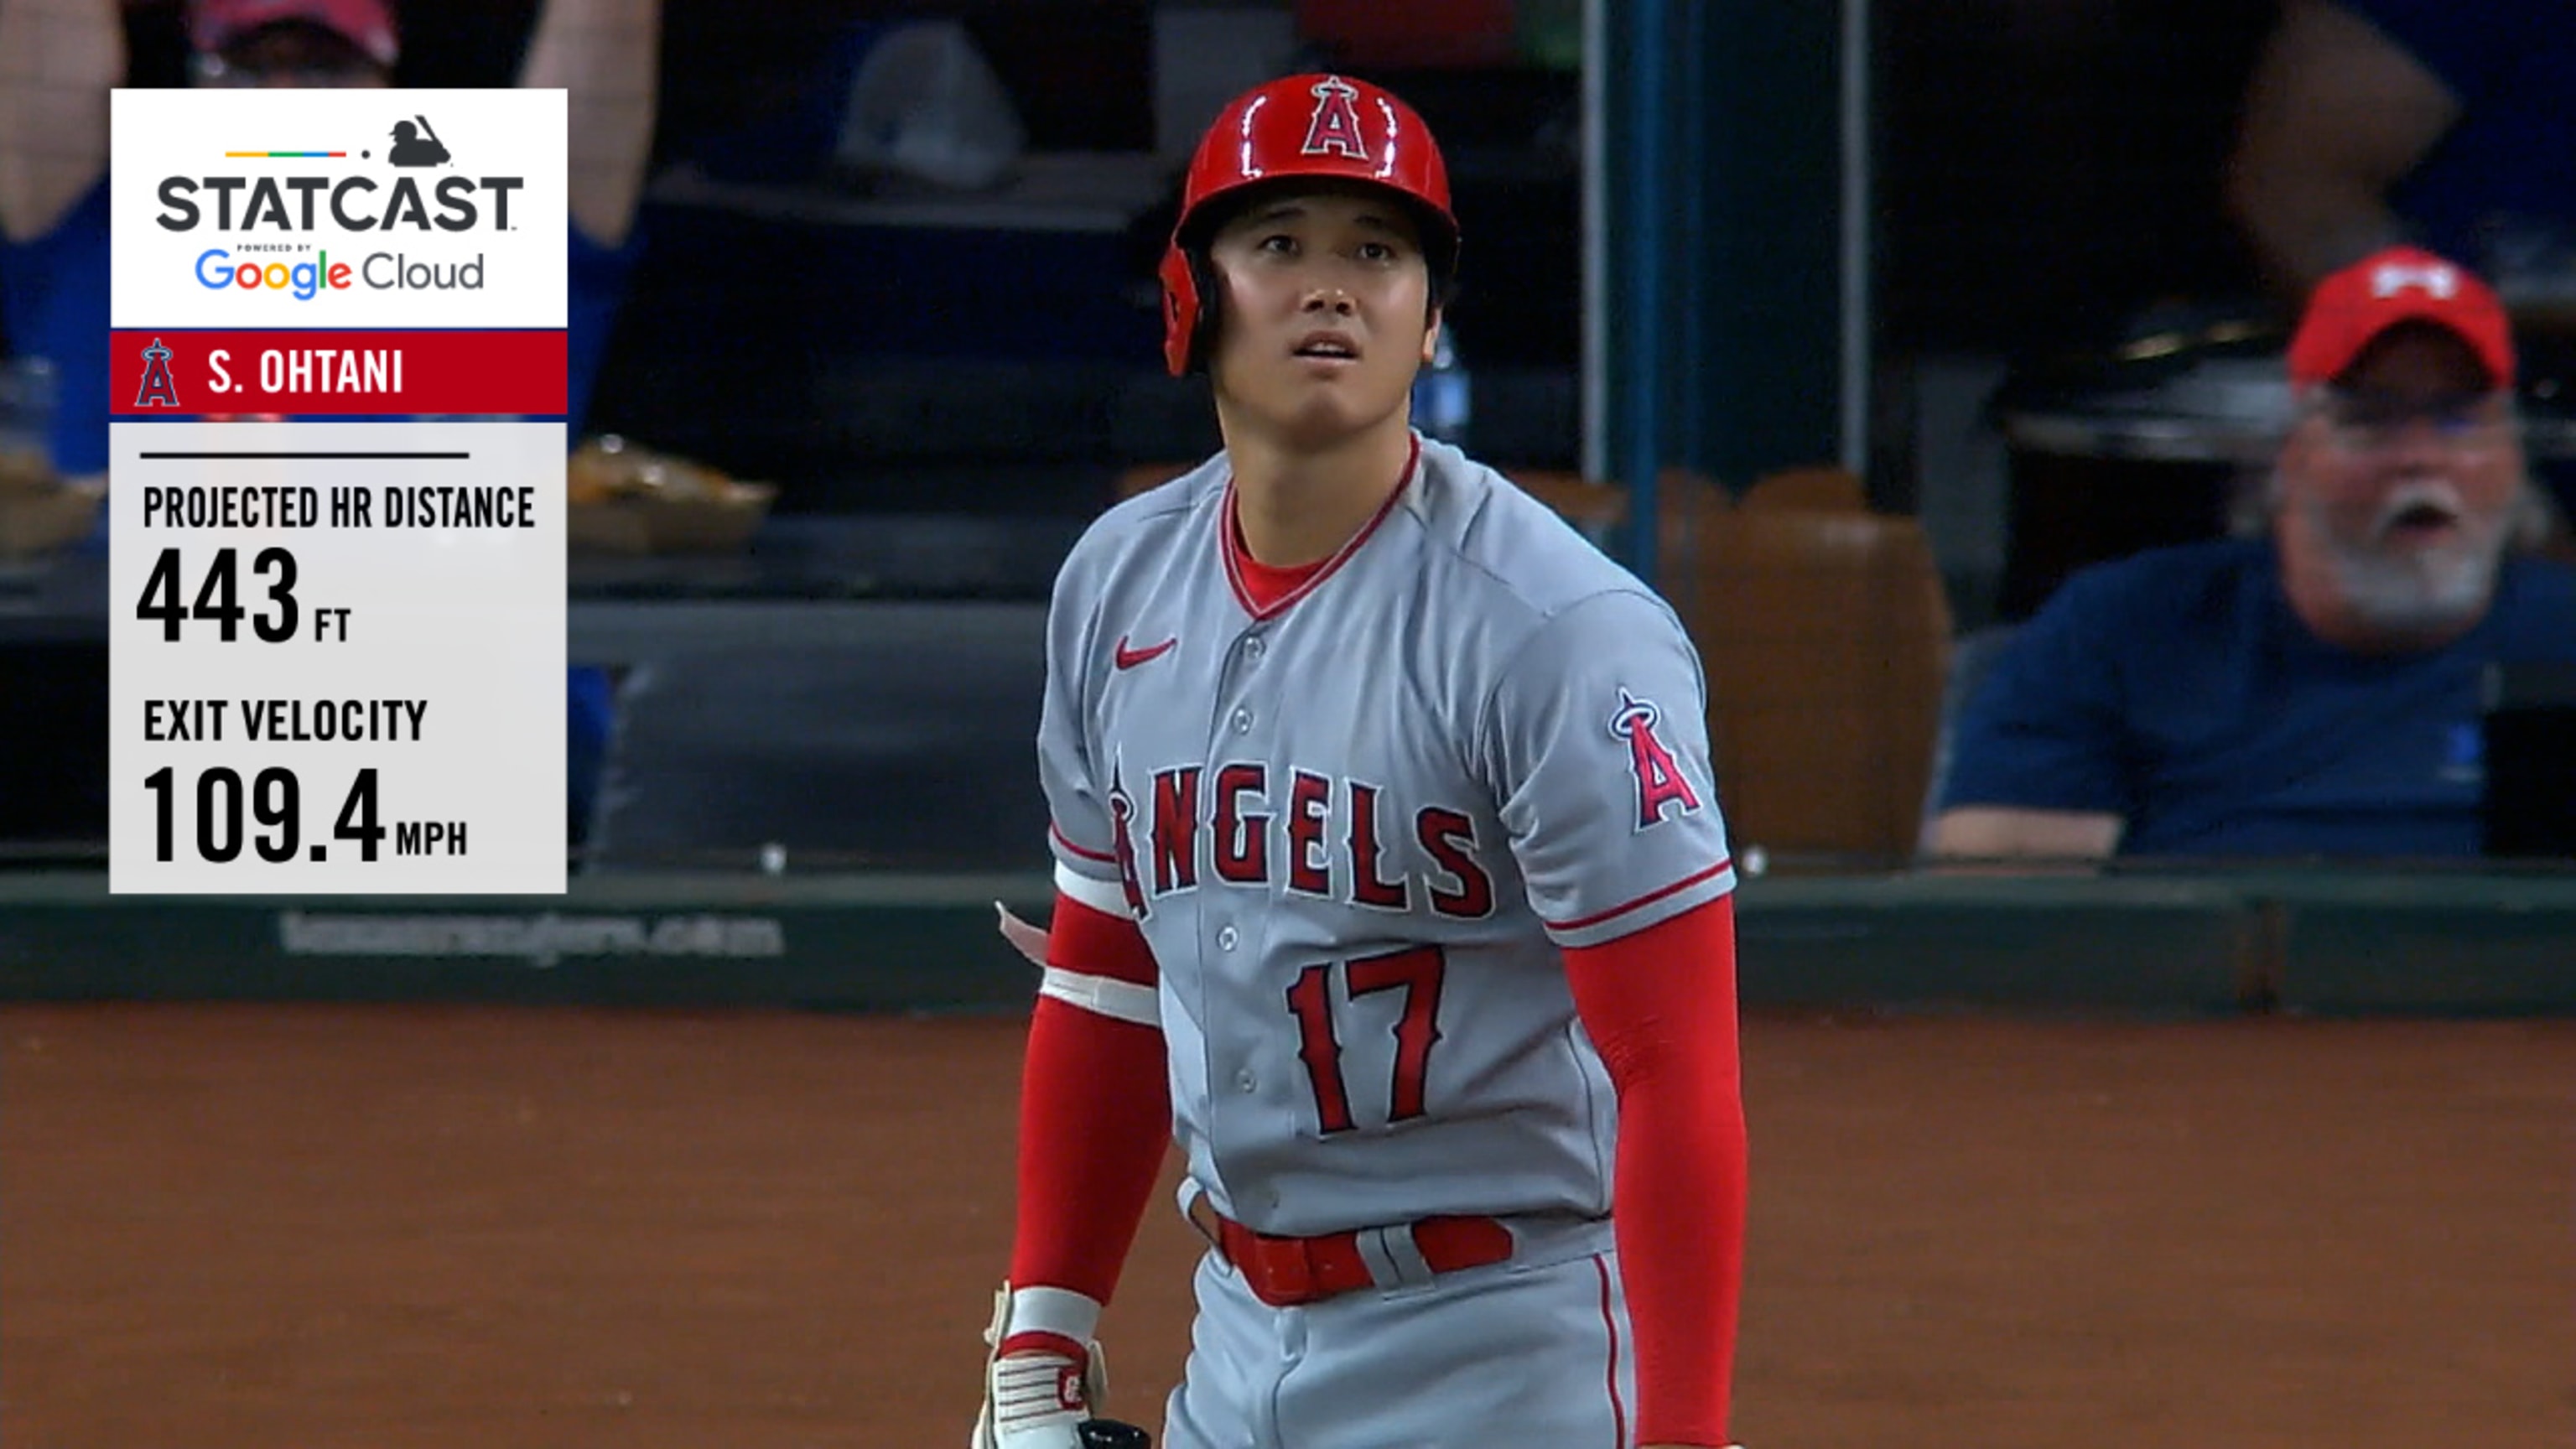 Ohtani gets the win, ties for the MLB HR lead